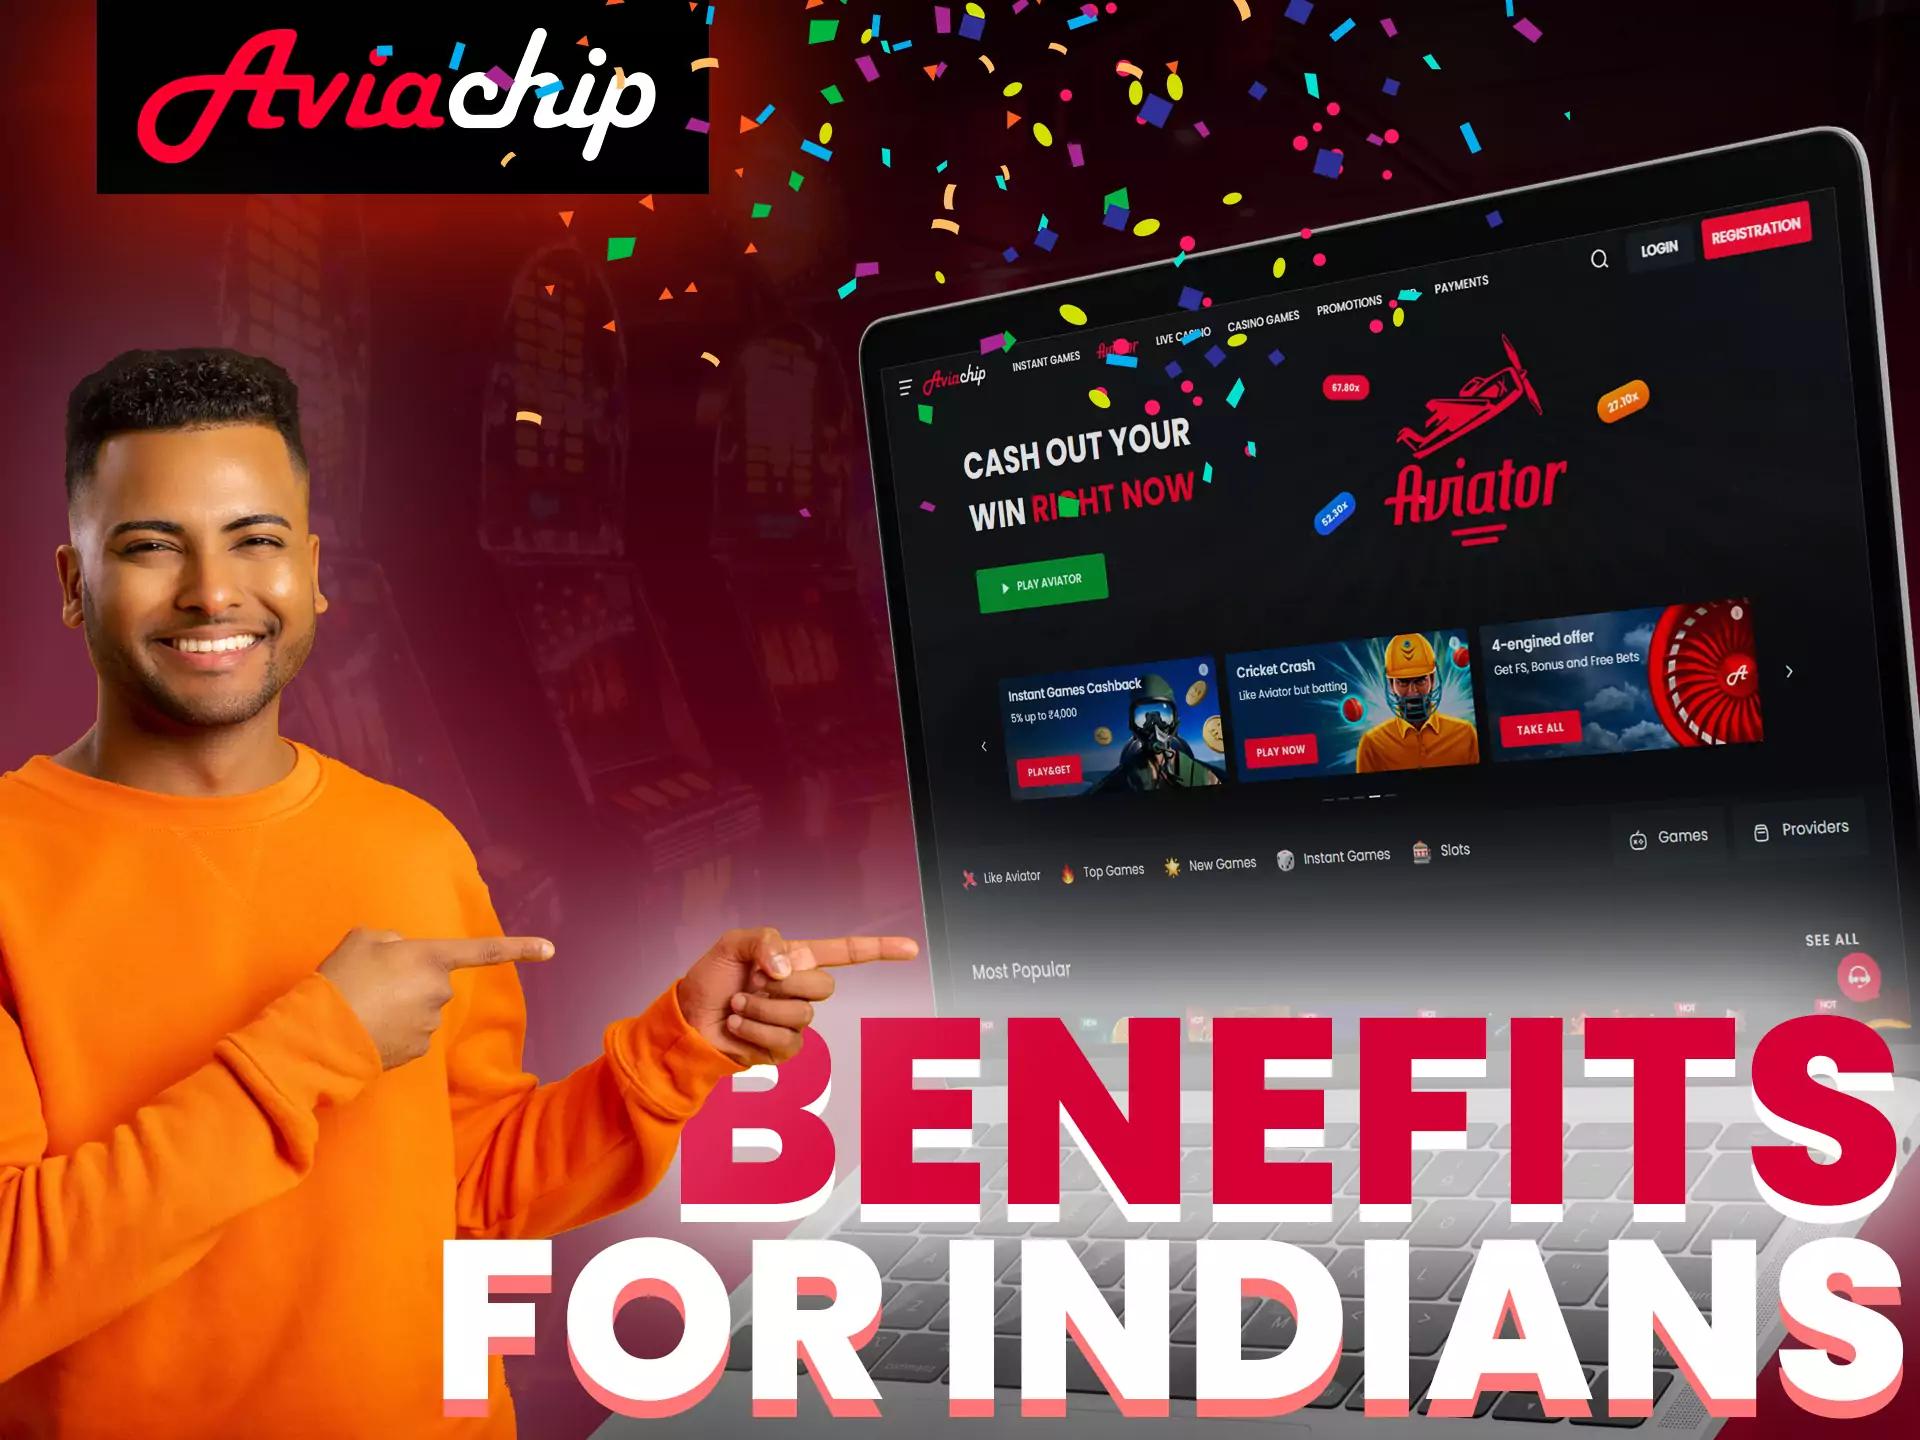 Aviachip offers its players special bonuses and benefits.